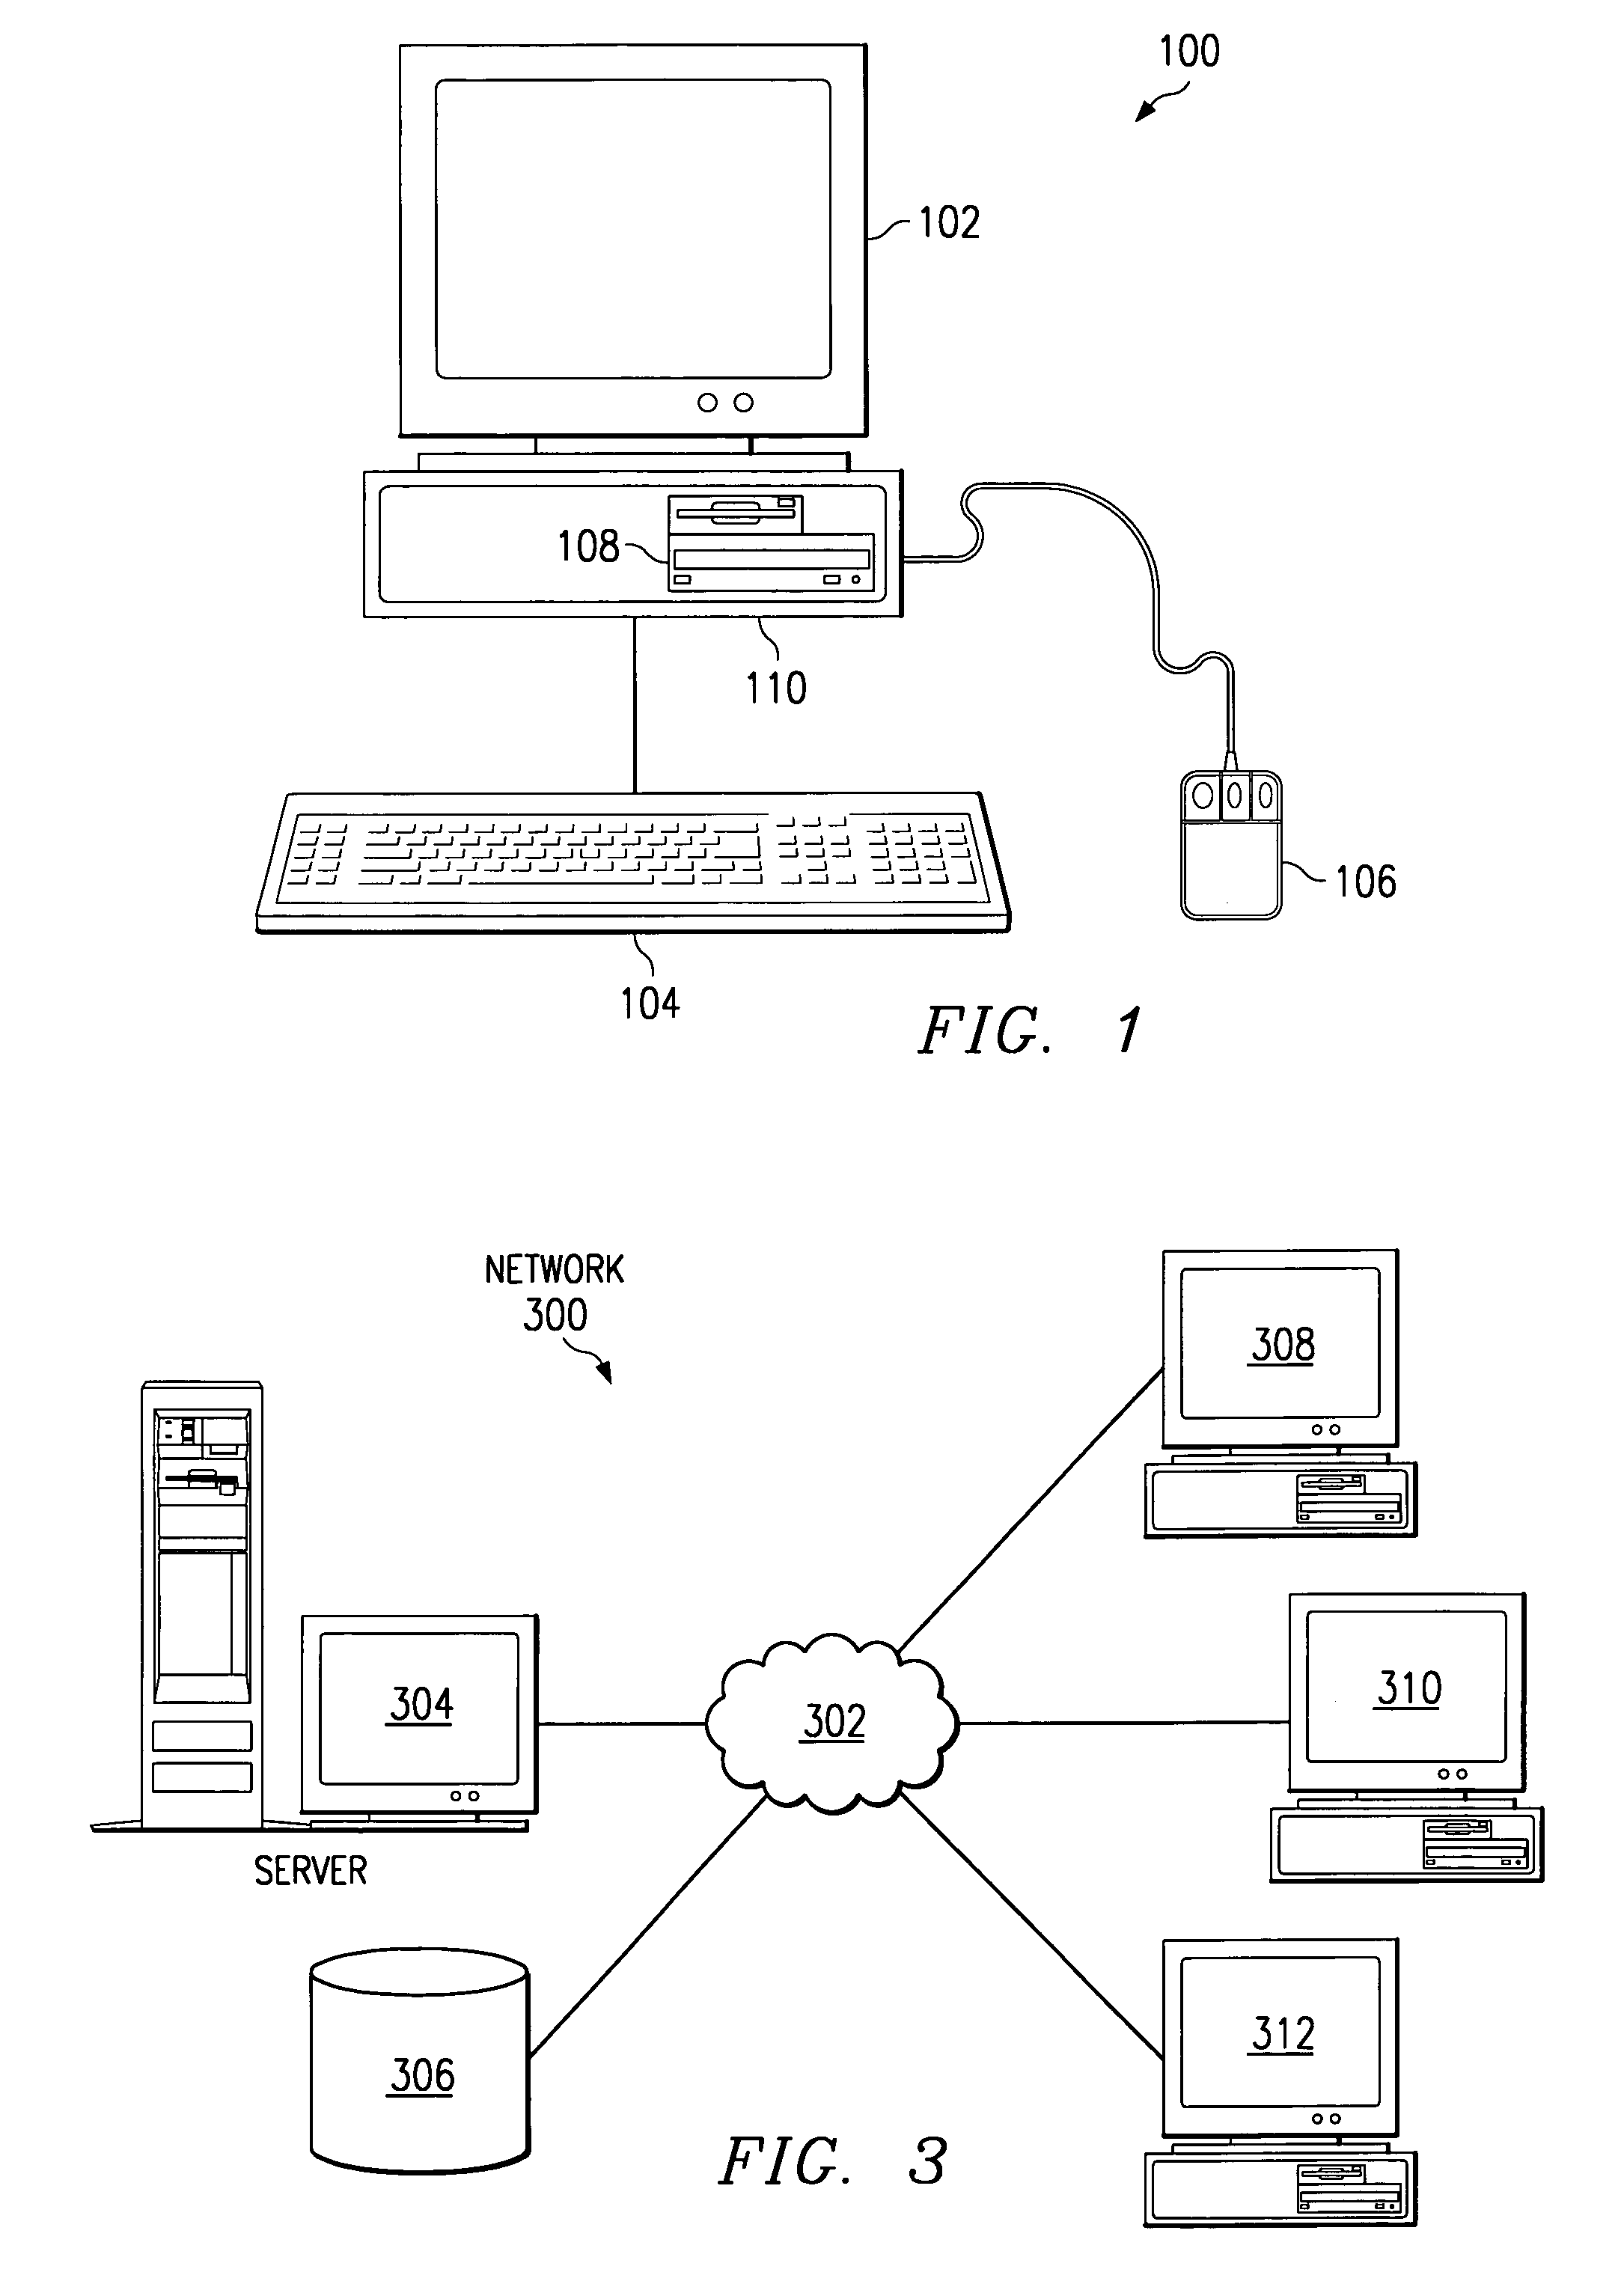 Method and apparatus for converting programs and source code files written in a programming language to equivalent markup language files